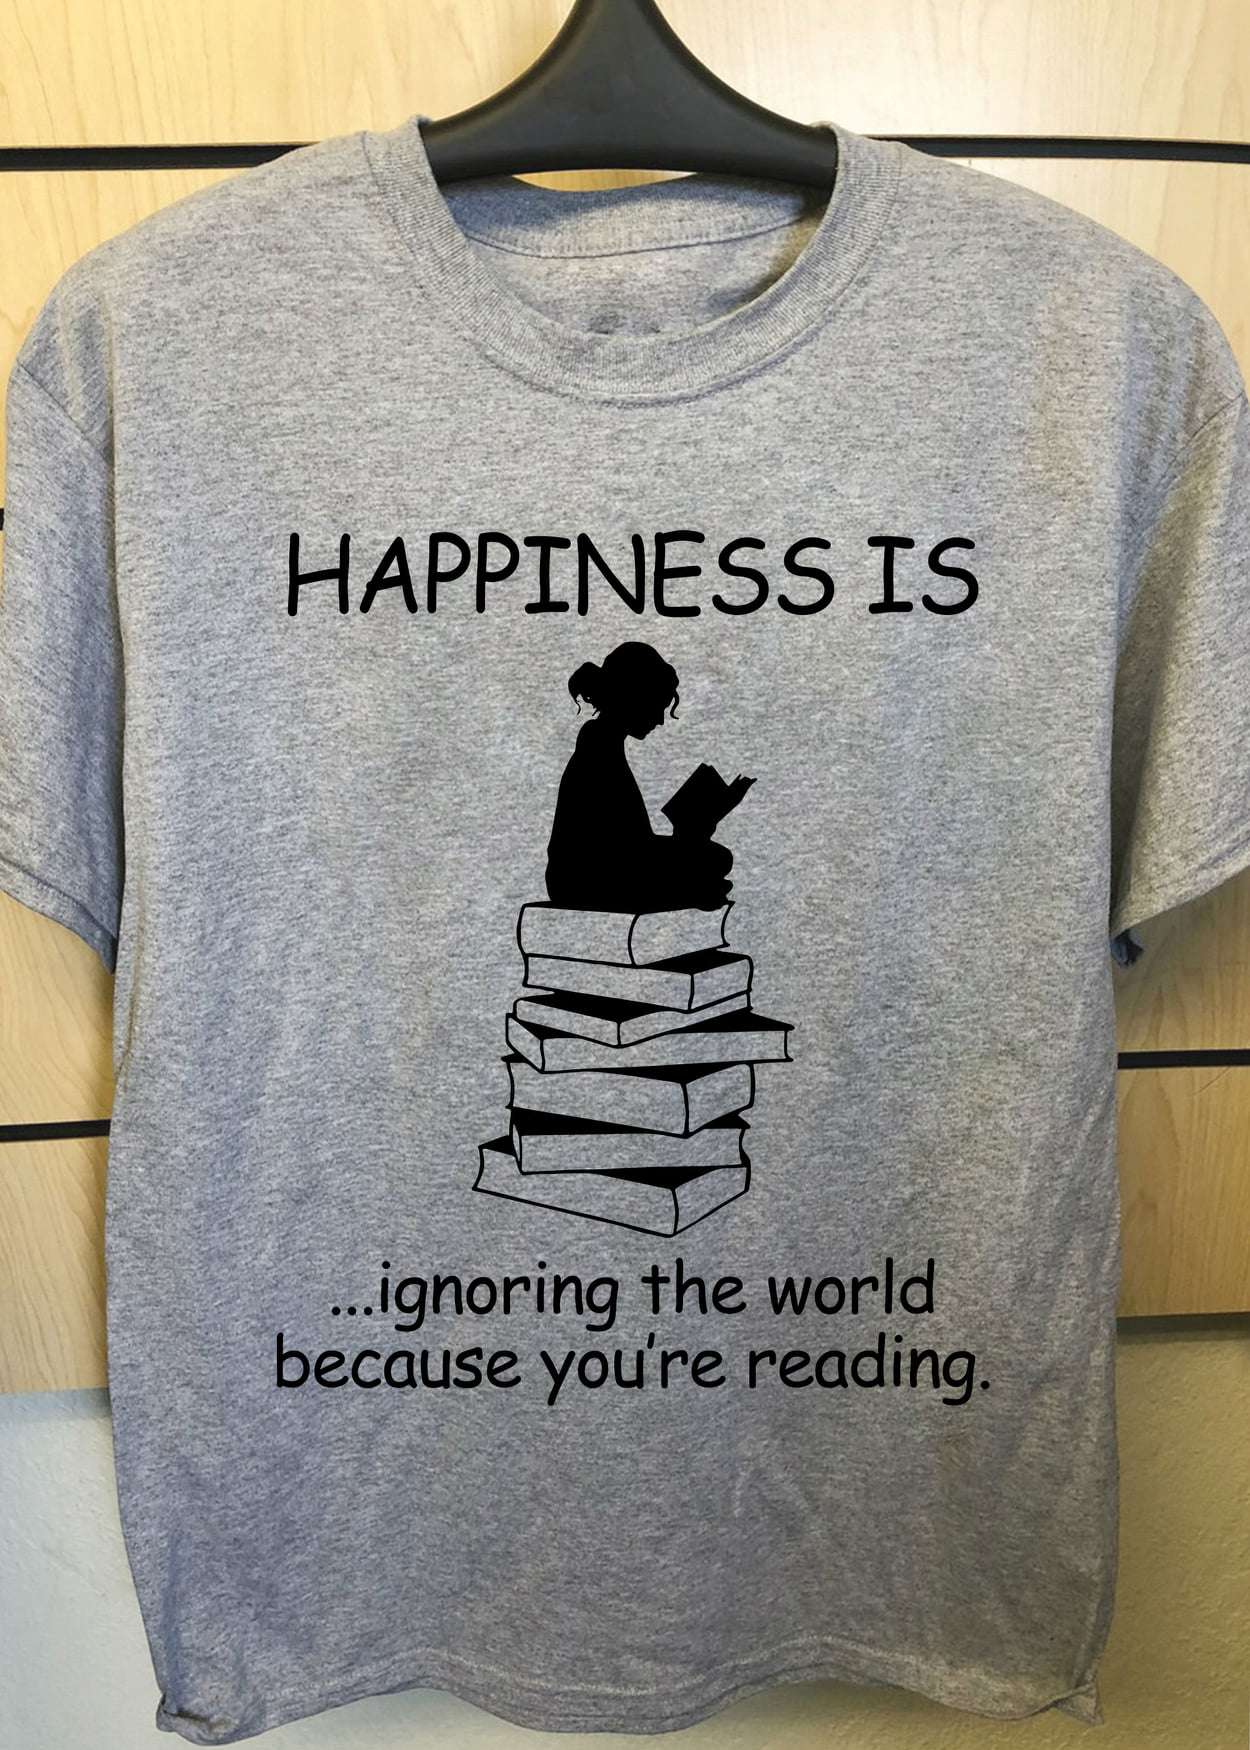 Girl Read Book - Happiness is ignoring the world because you're reading